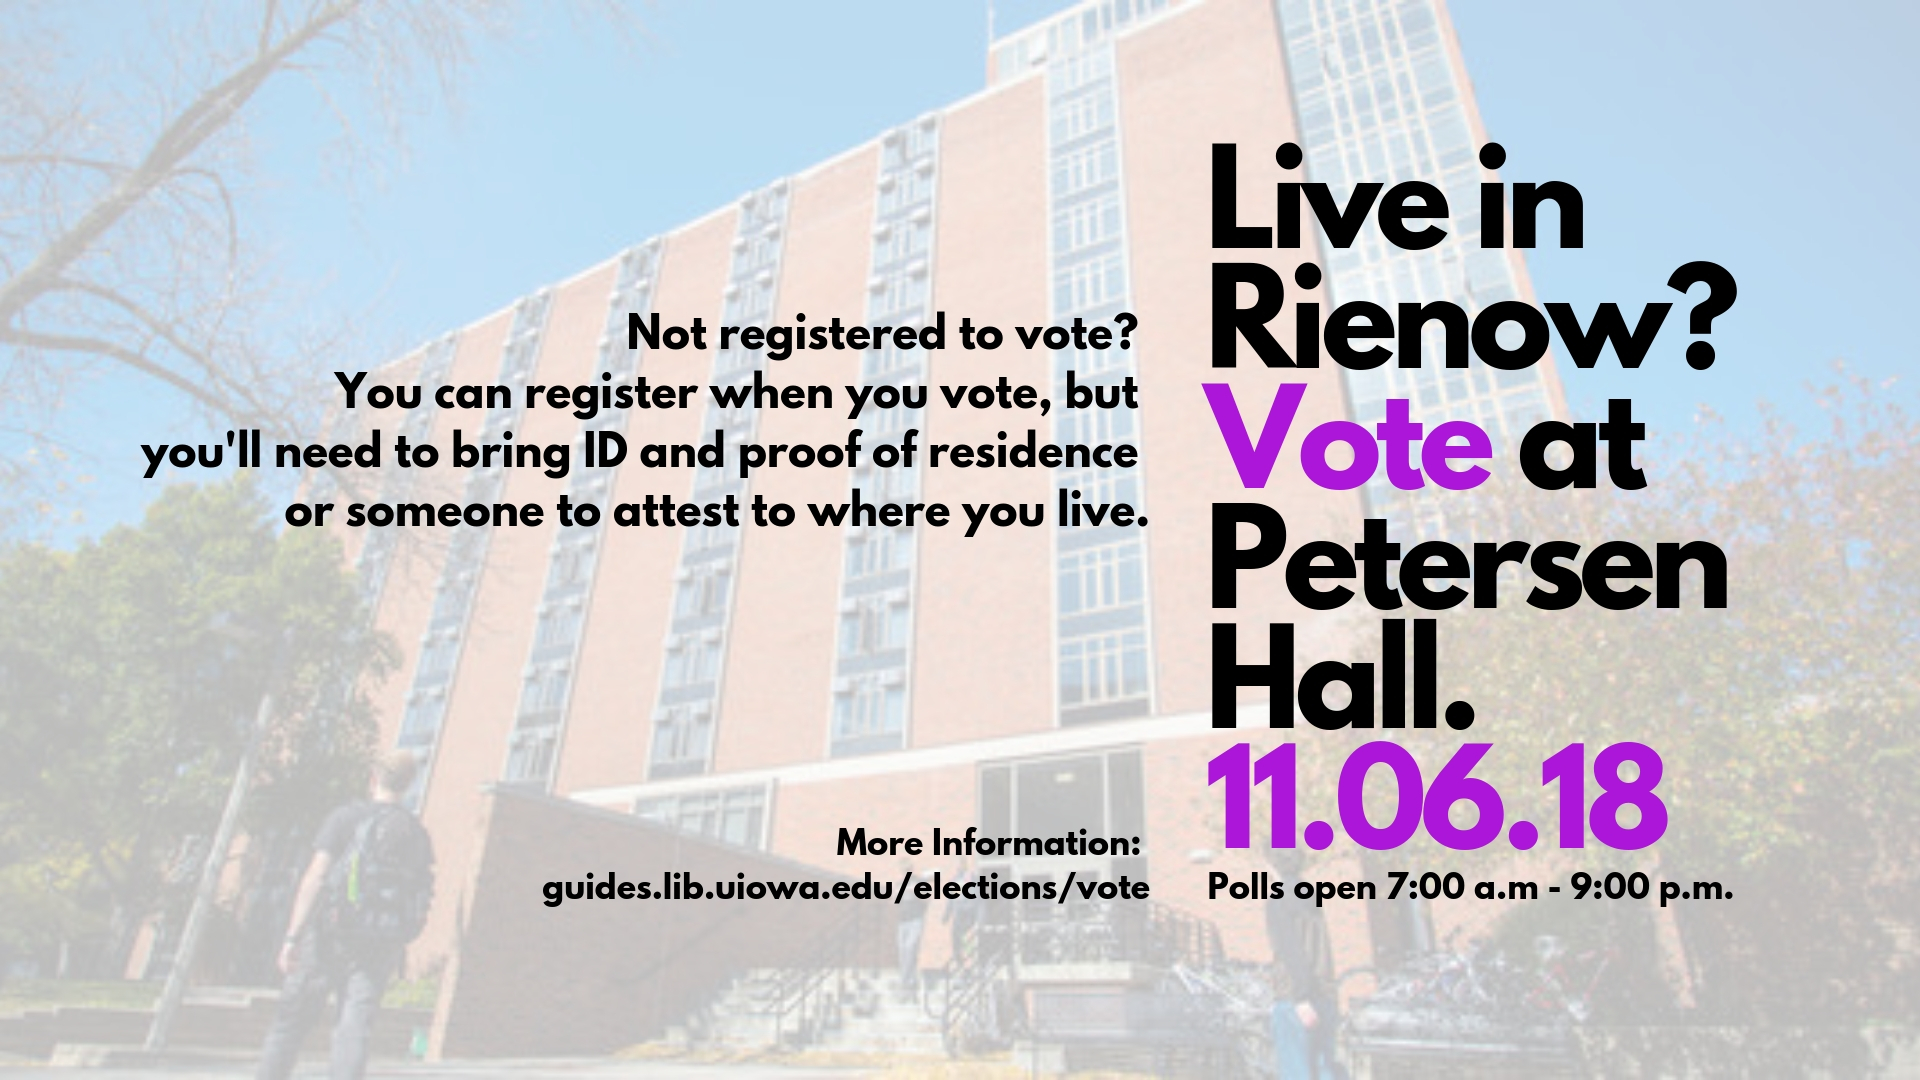 Rienow Polling Place is Petersen Hall